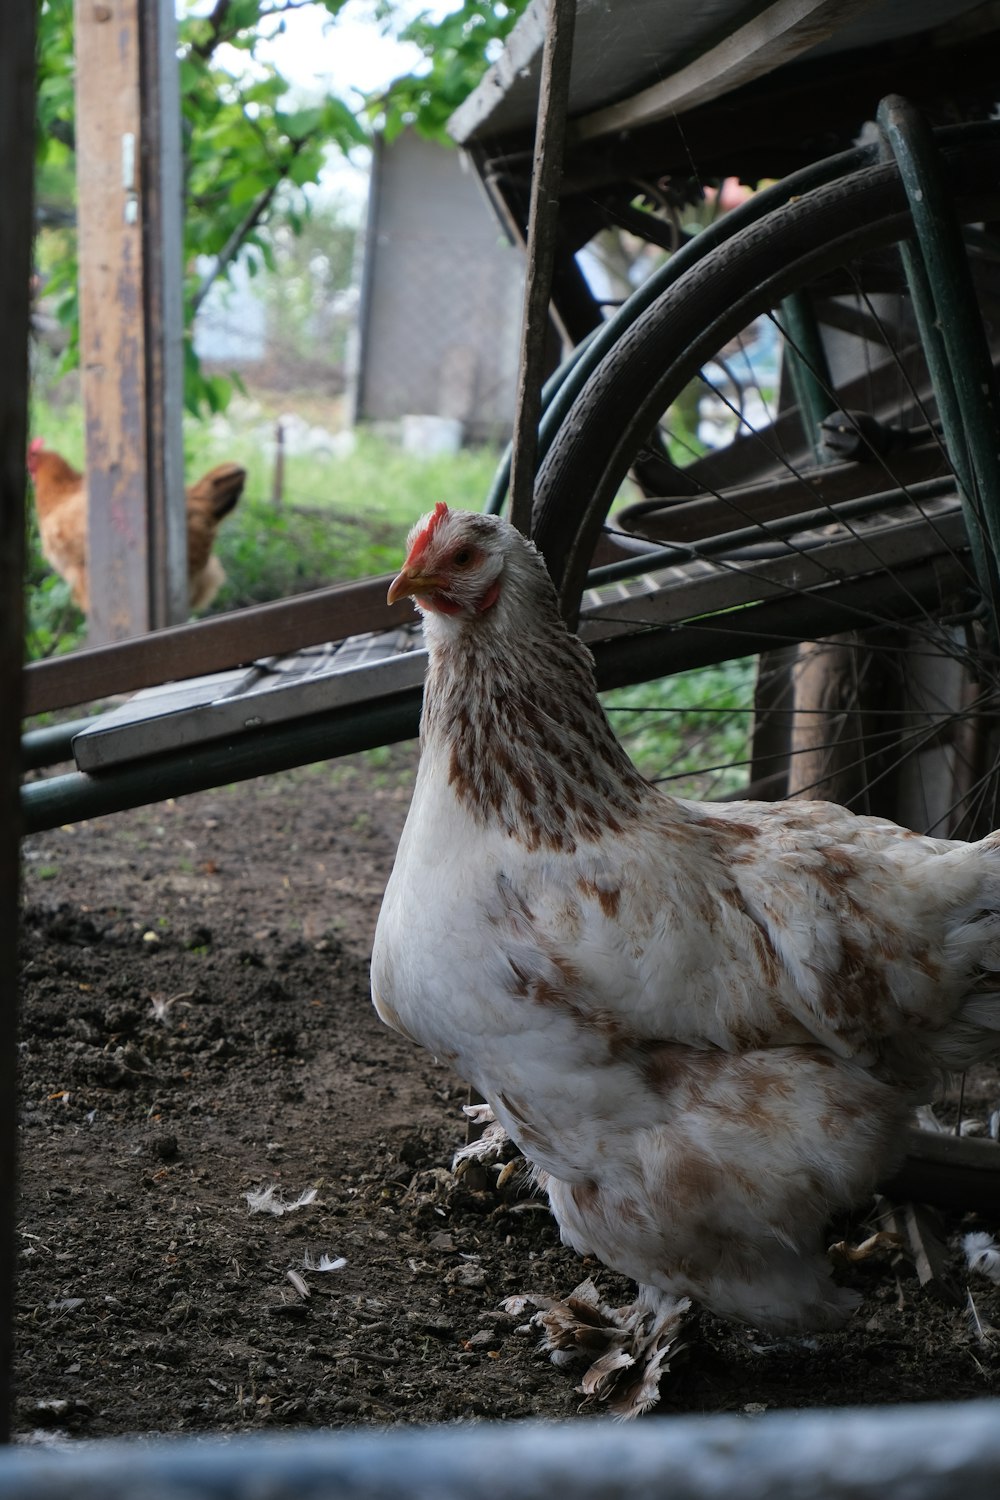 a brown and white chicken standing next to a wheel